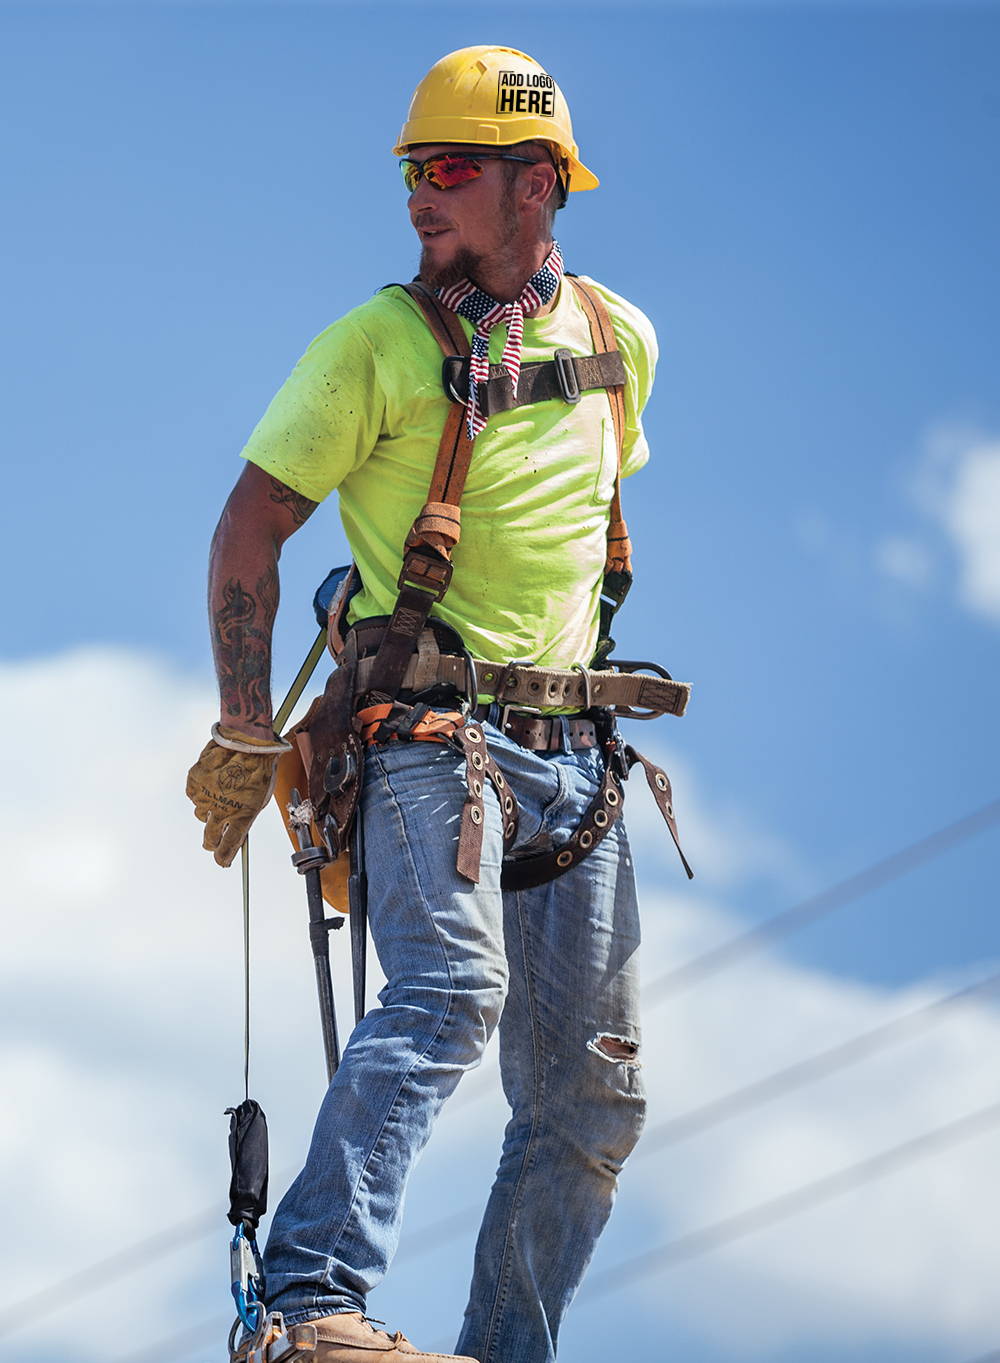 Construction worker wearing hi-vis shirt, safety glasses, fall protection harness and cap style hard hat with company logo custom printed on the side.